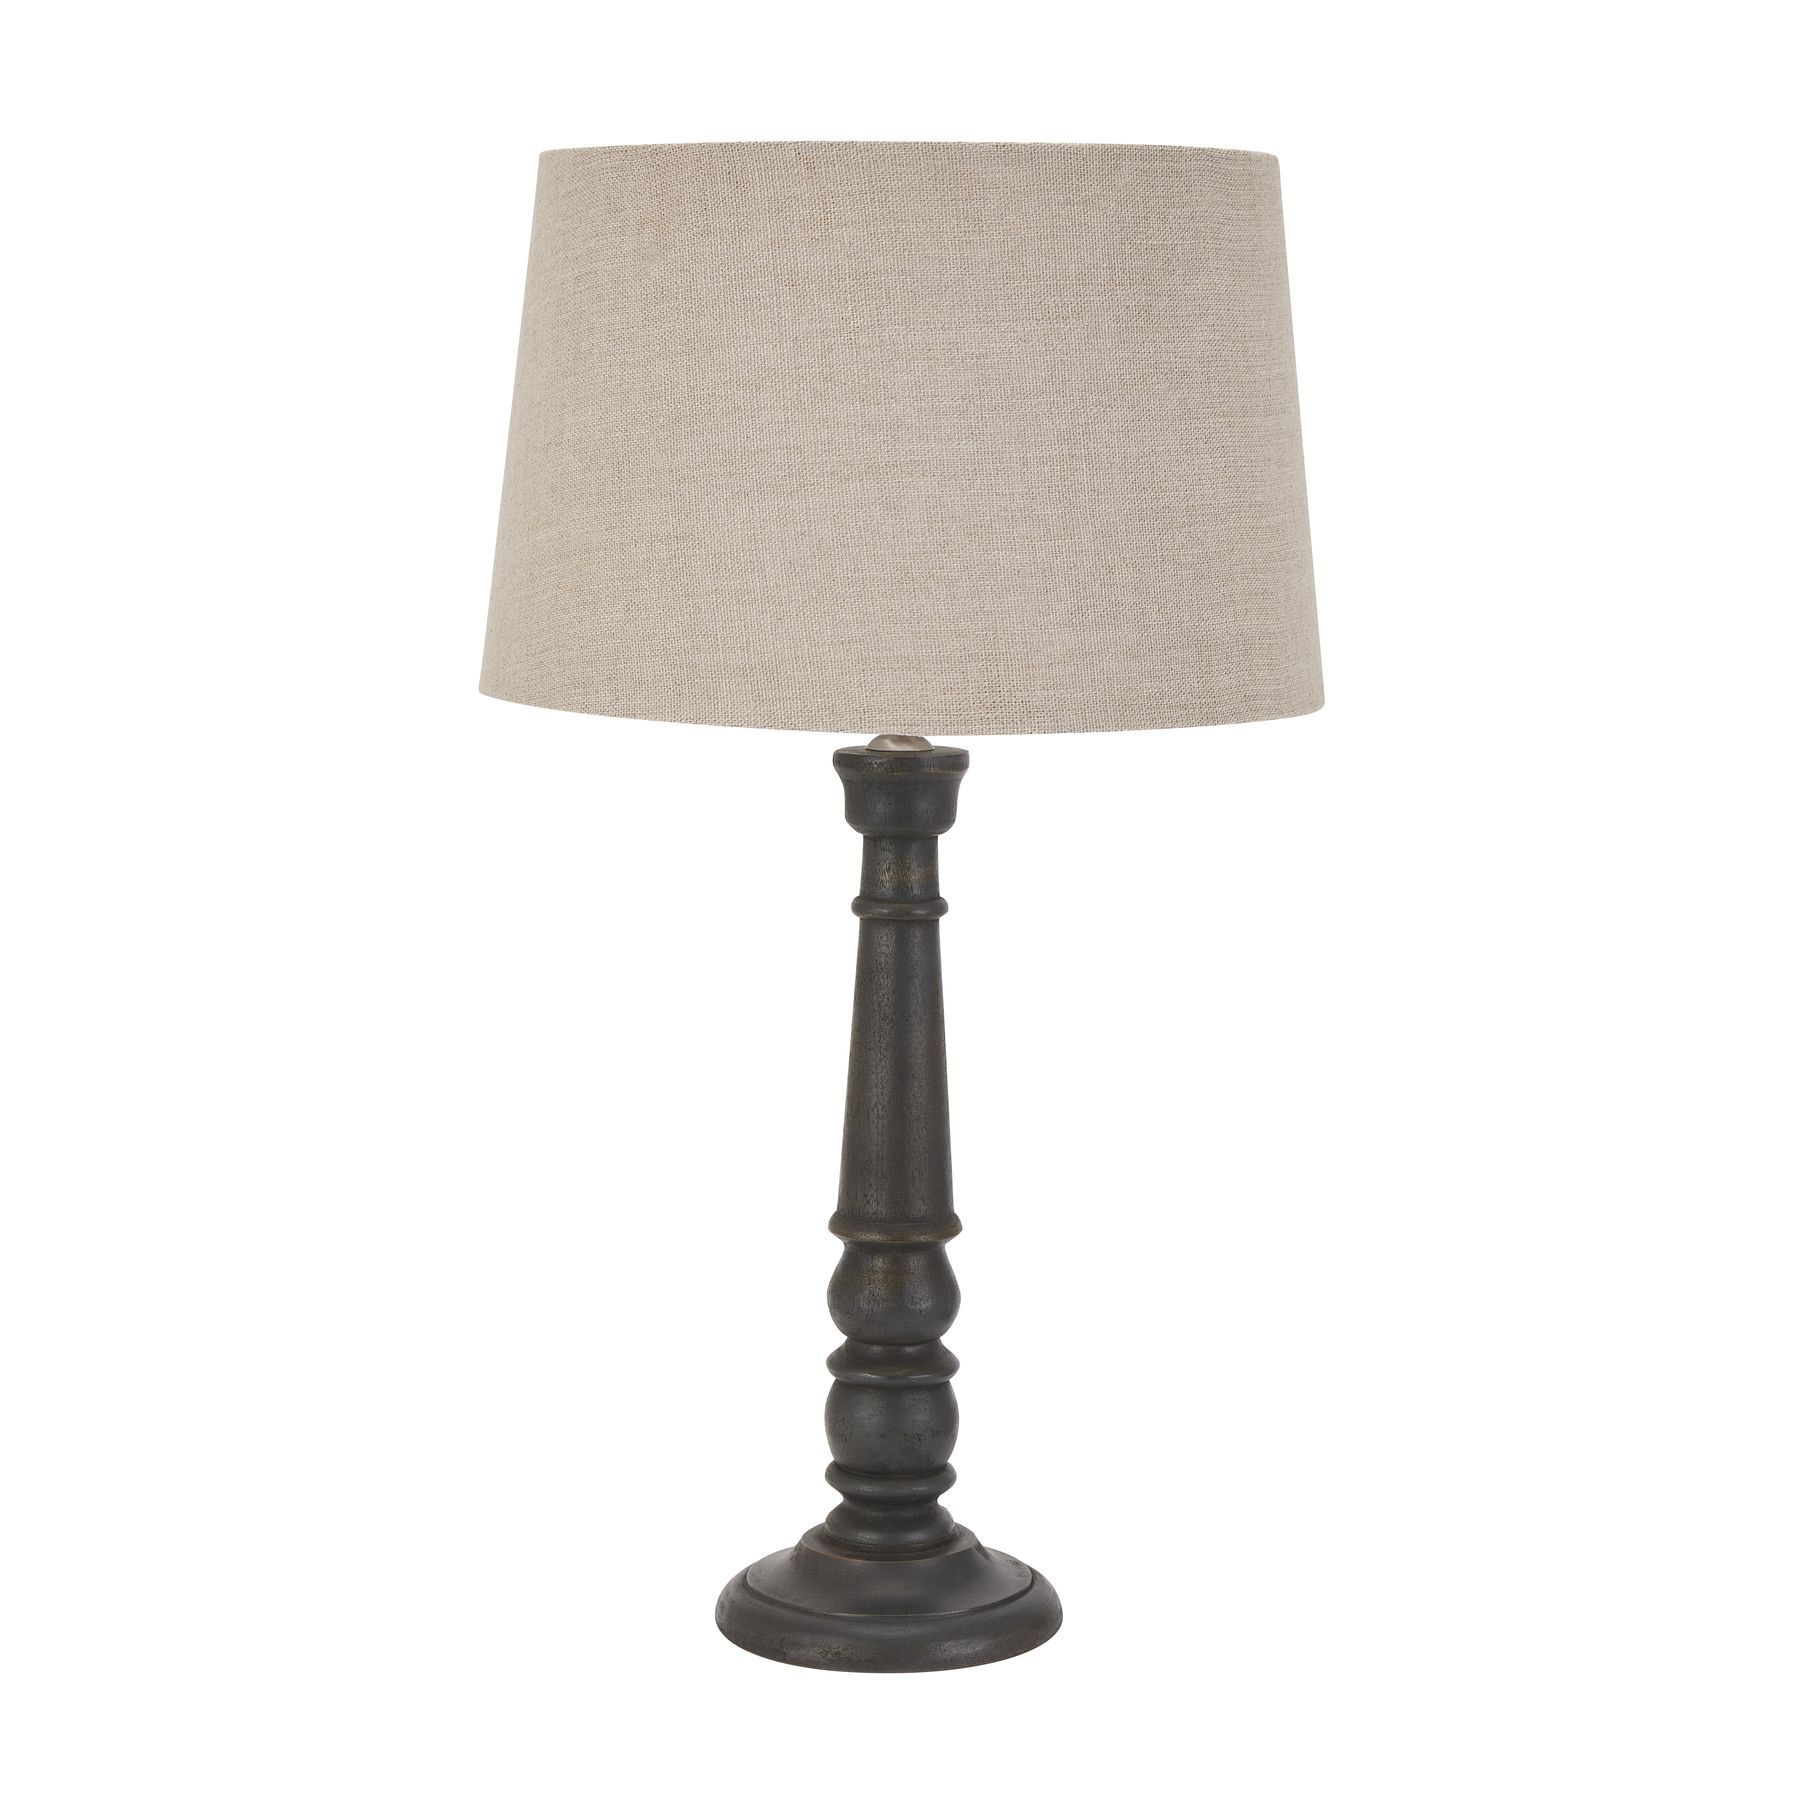 Delaney Grey Bead Candlestick Lamp With Linen Shade - Image 1